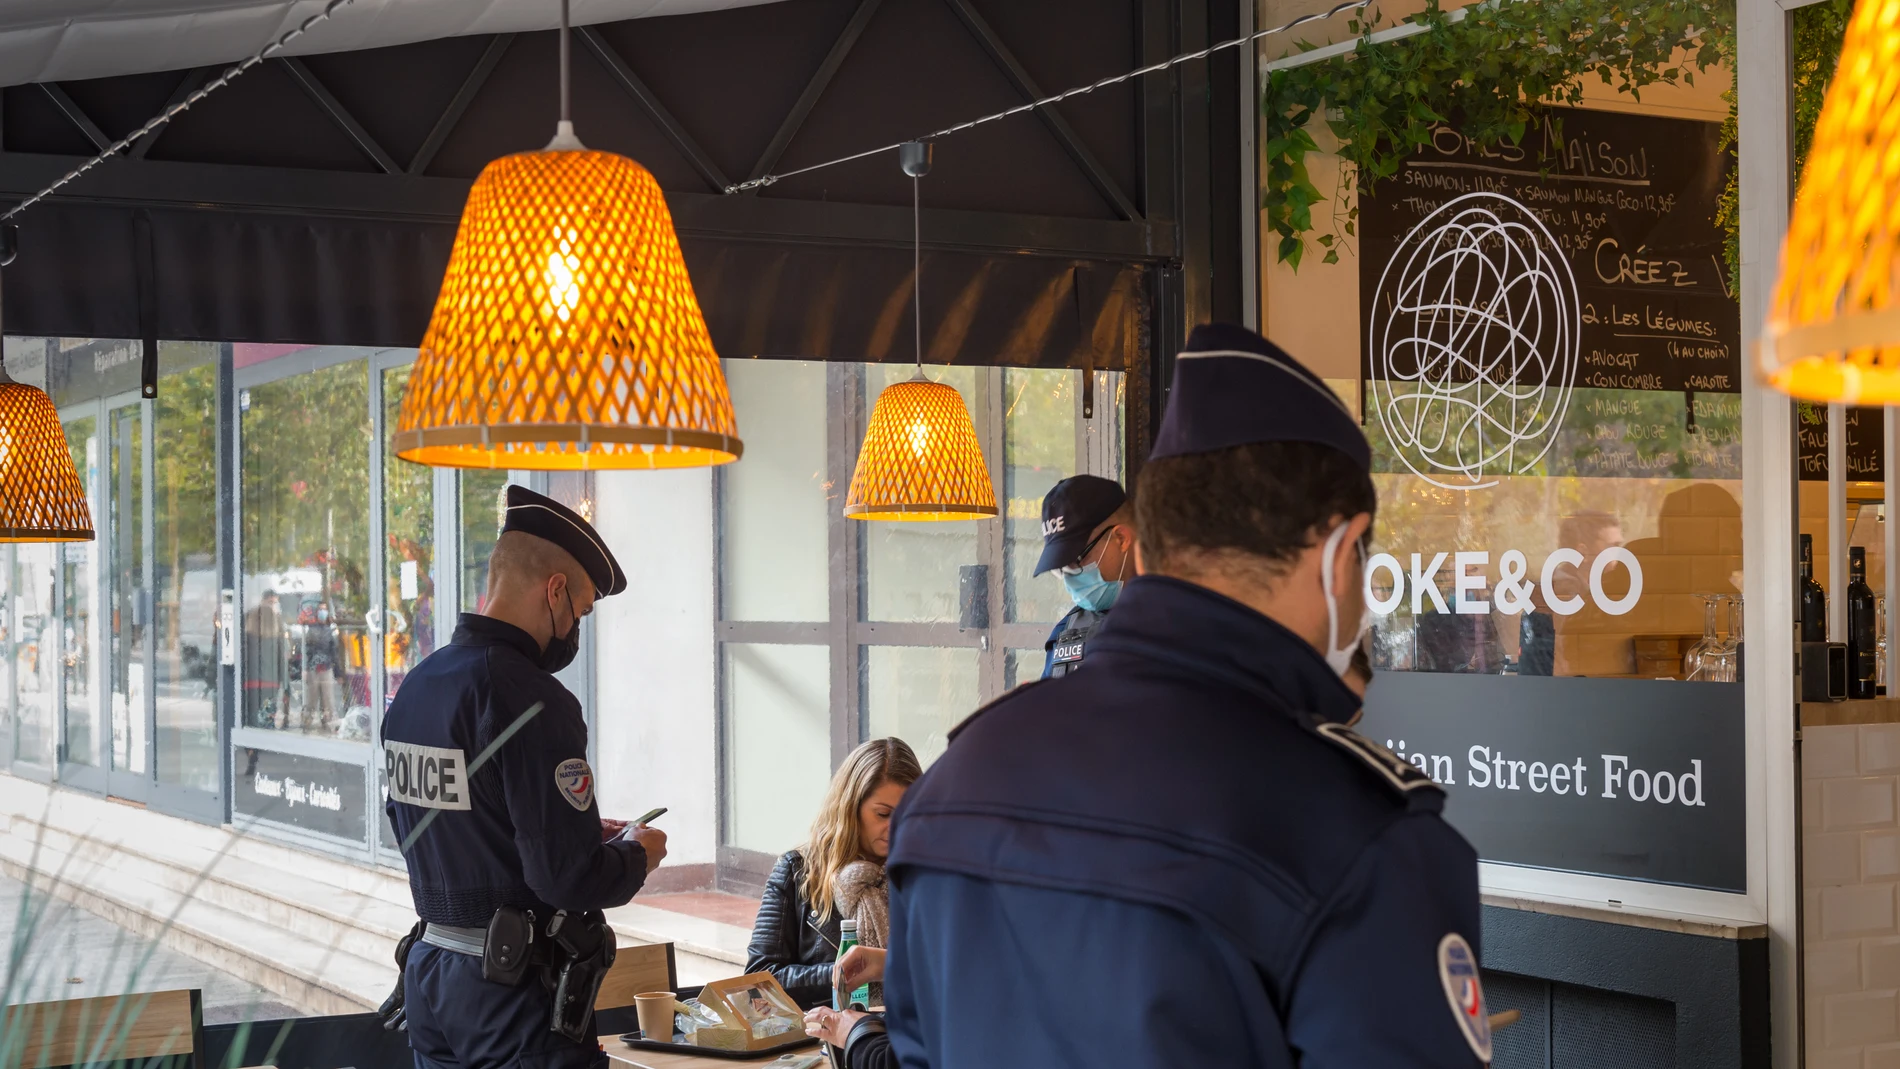 November 24, 2021, Draguignan, Var, France: Police officers are seen checking the health pass of a customer in a restaurant..Due to a surge in Covid-19 positive cases, the French government has decided to reinforce the controls on the obligation of the Sanitary Pass in restaurants and bars. The main objective for the French government is to slow down a fifth wave of contamination before the Christmas period and to avoid confinement measures.24/11/2021